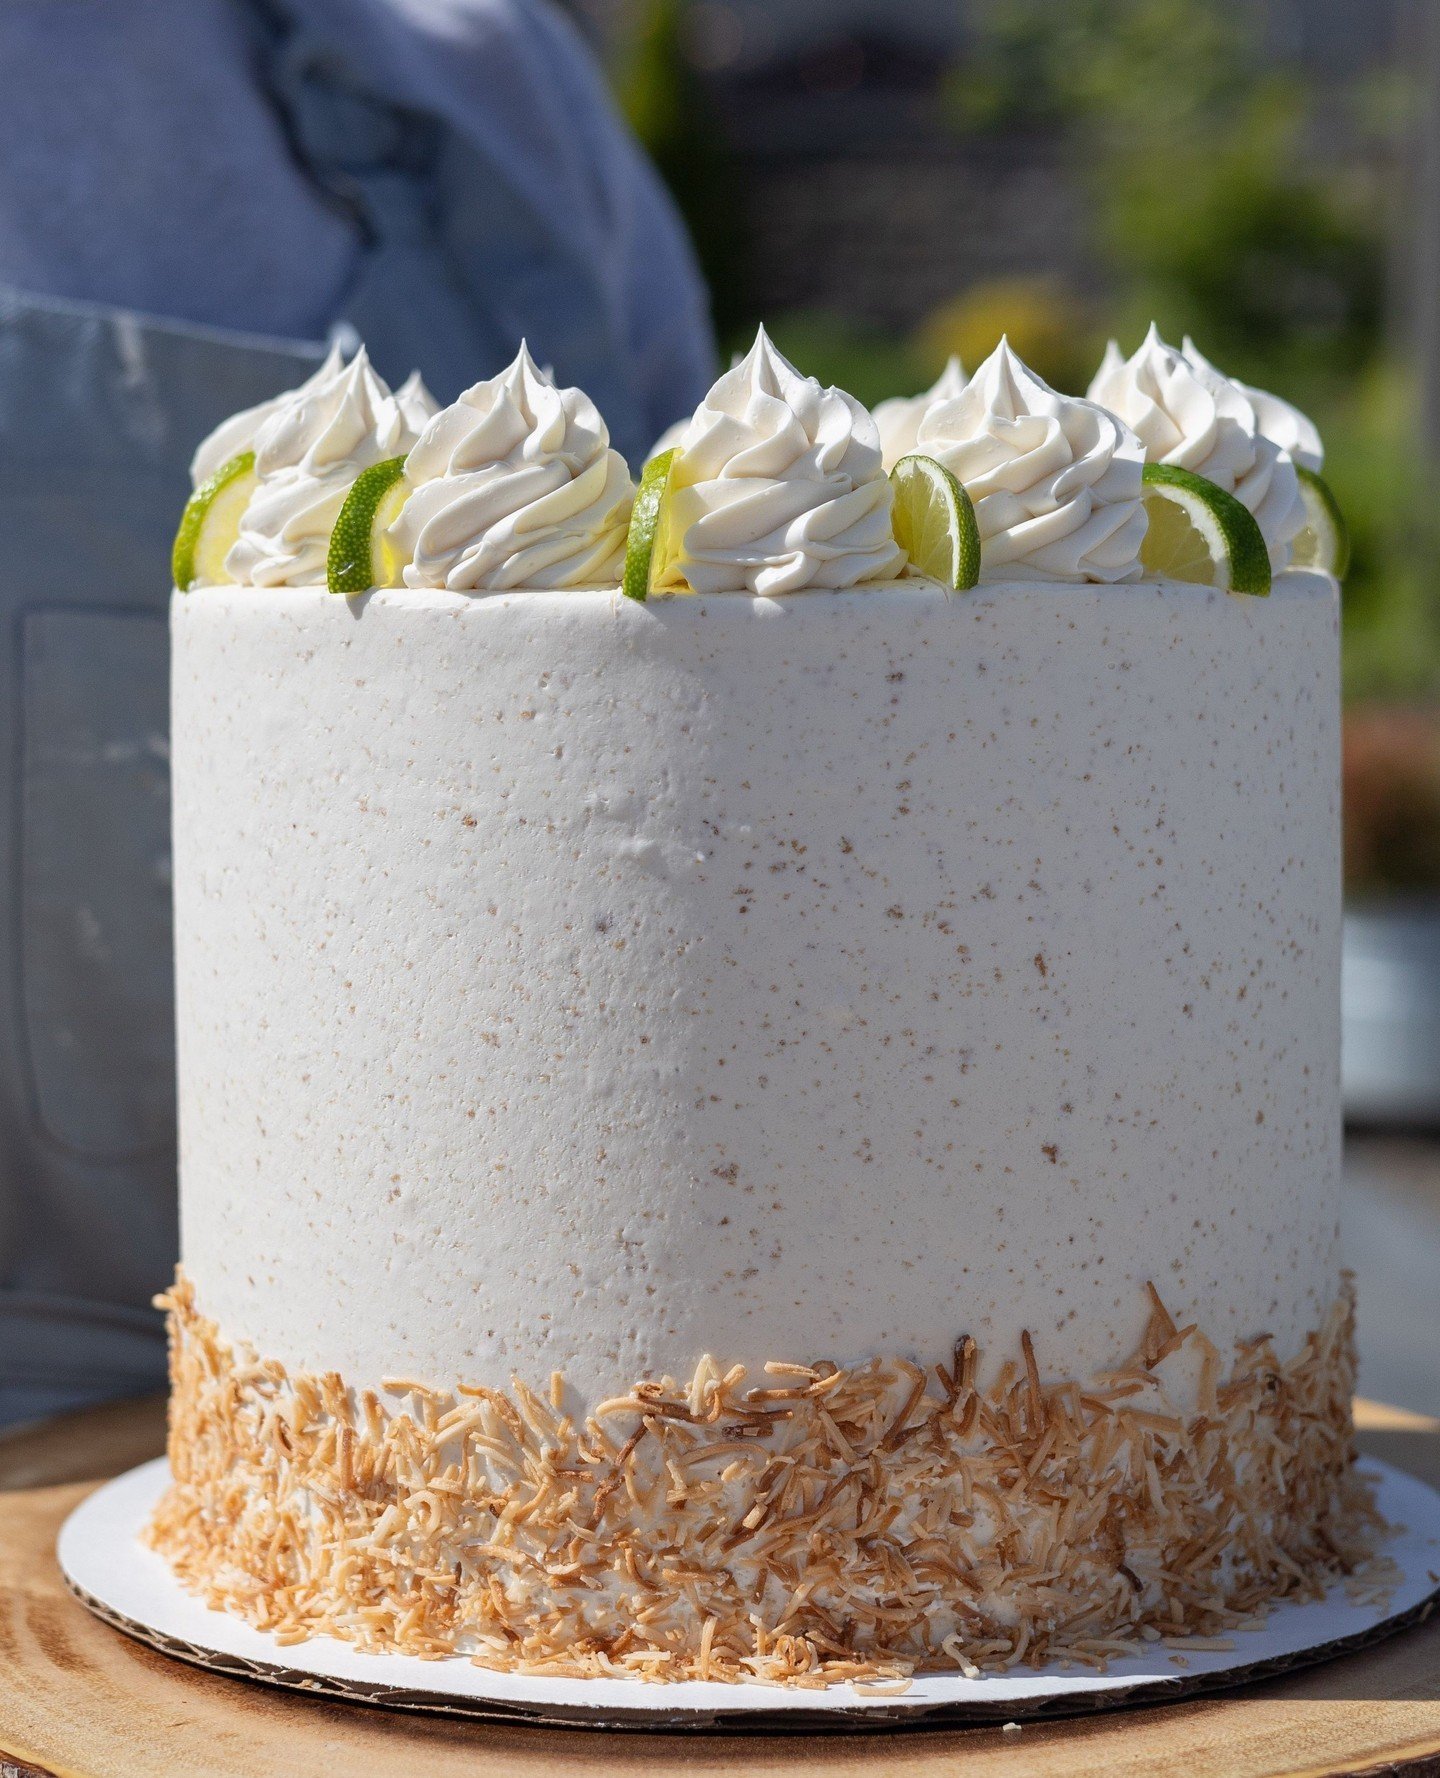 Coconut + Key Lime Pie = a very yummy CAKE DAY!⁠
⁠
Coconut Key Lime Pie Cake! 6 layers of Coconut lime cake soaked with a key lime simple syrup, filled with a key lime pie filling and graham cracker buttercream.⁠
⁠
Available by the slice in Fika &amp